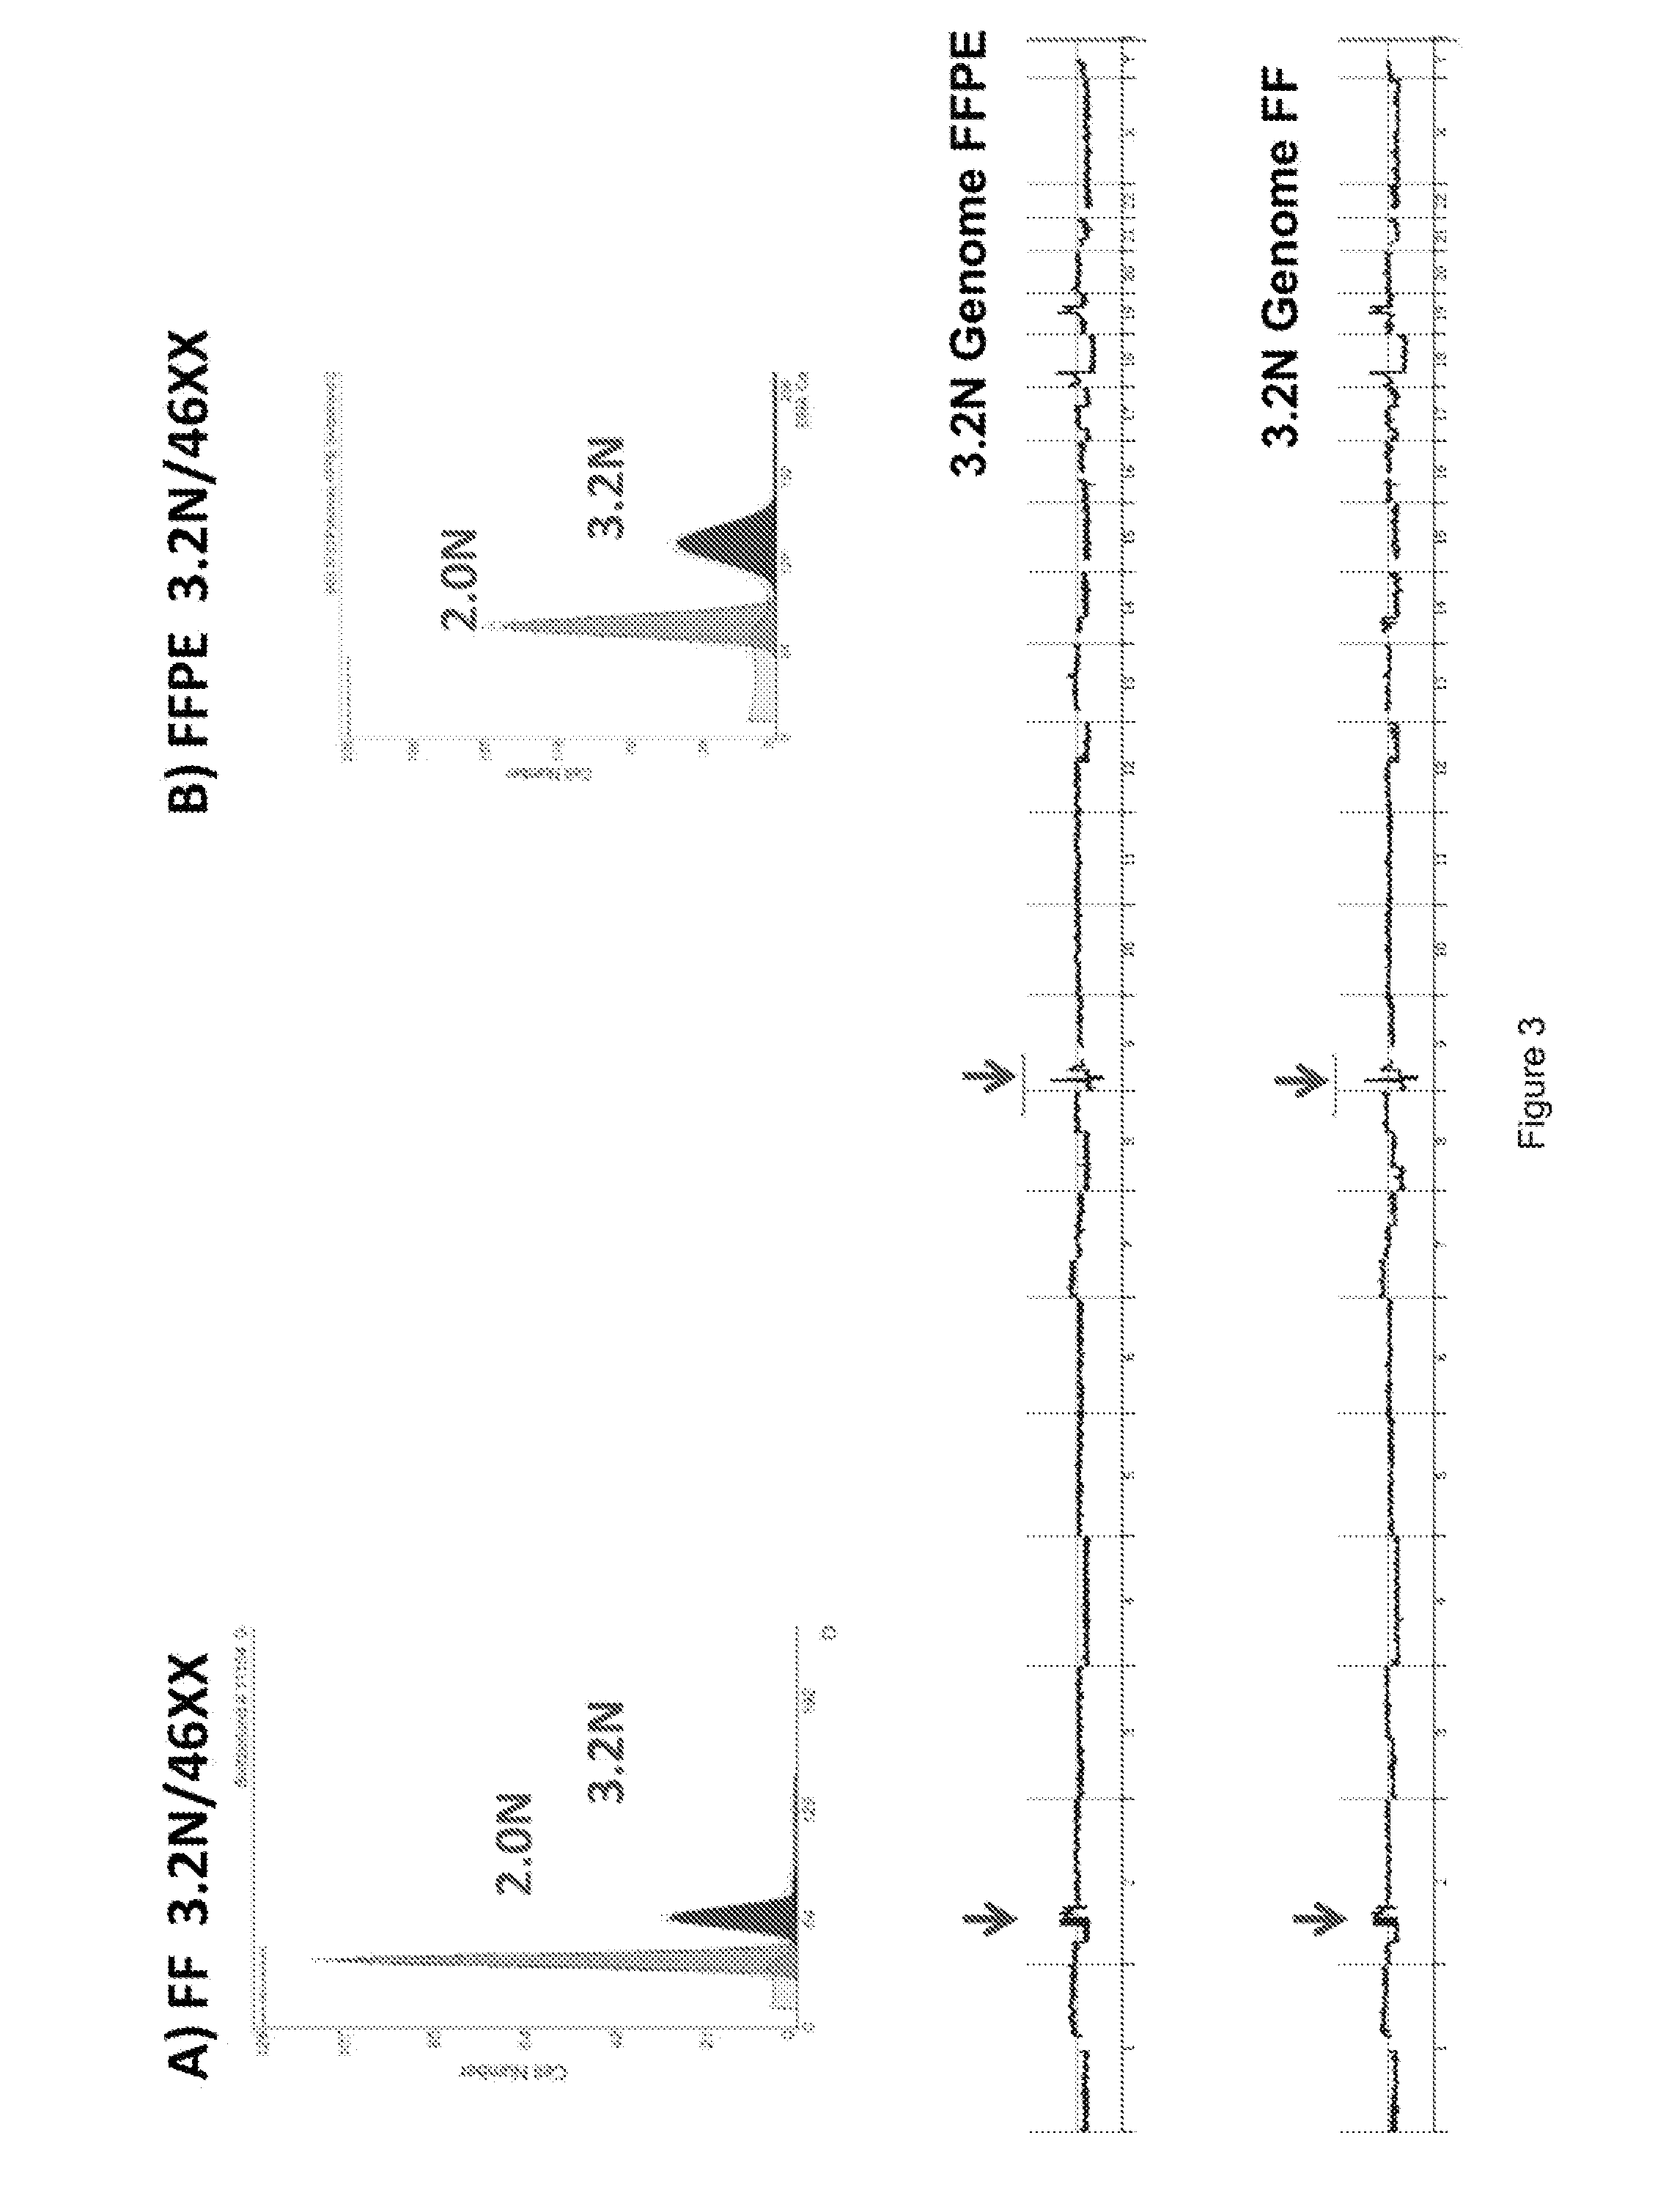 System and method of genomic profiling